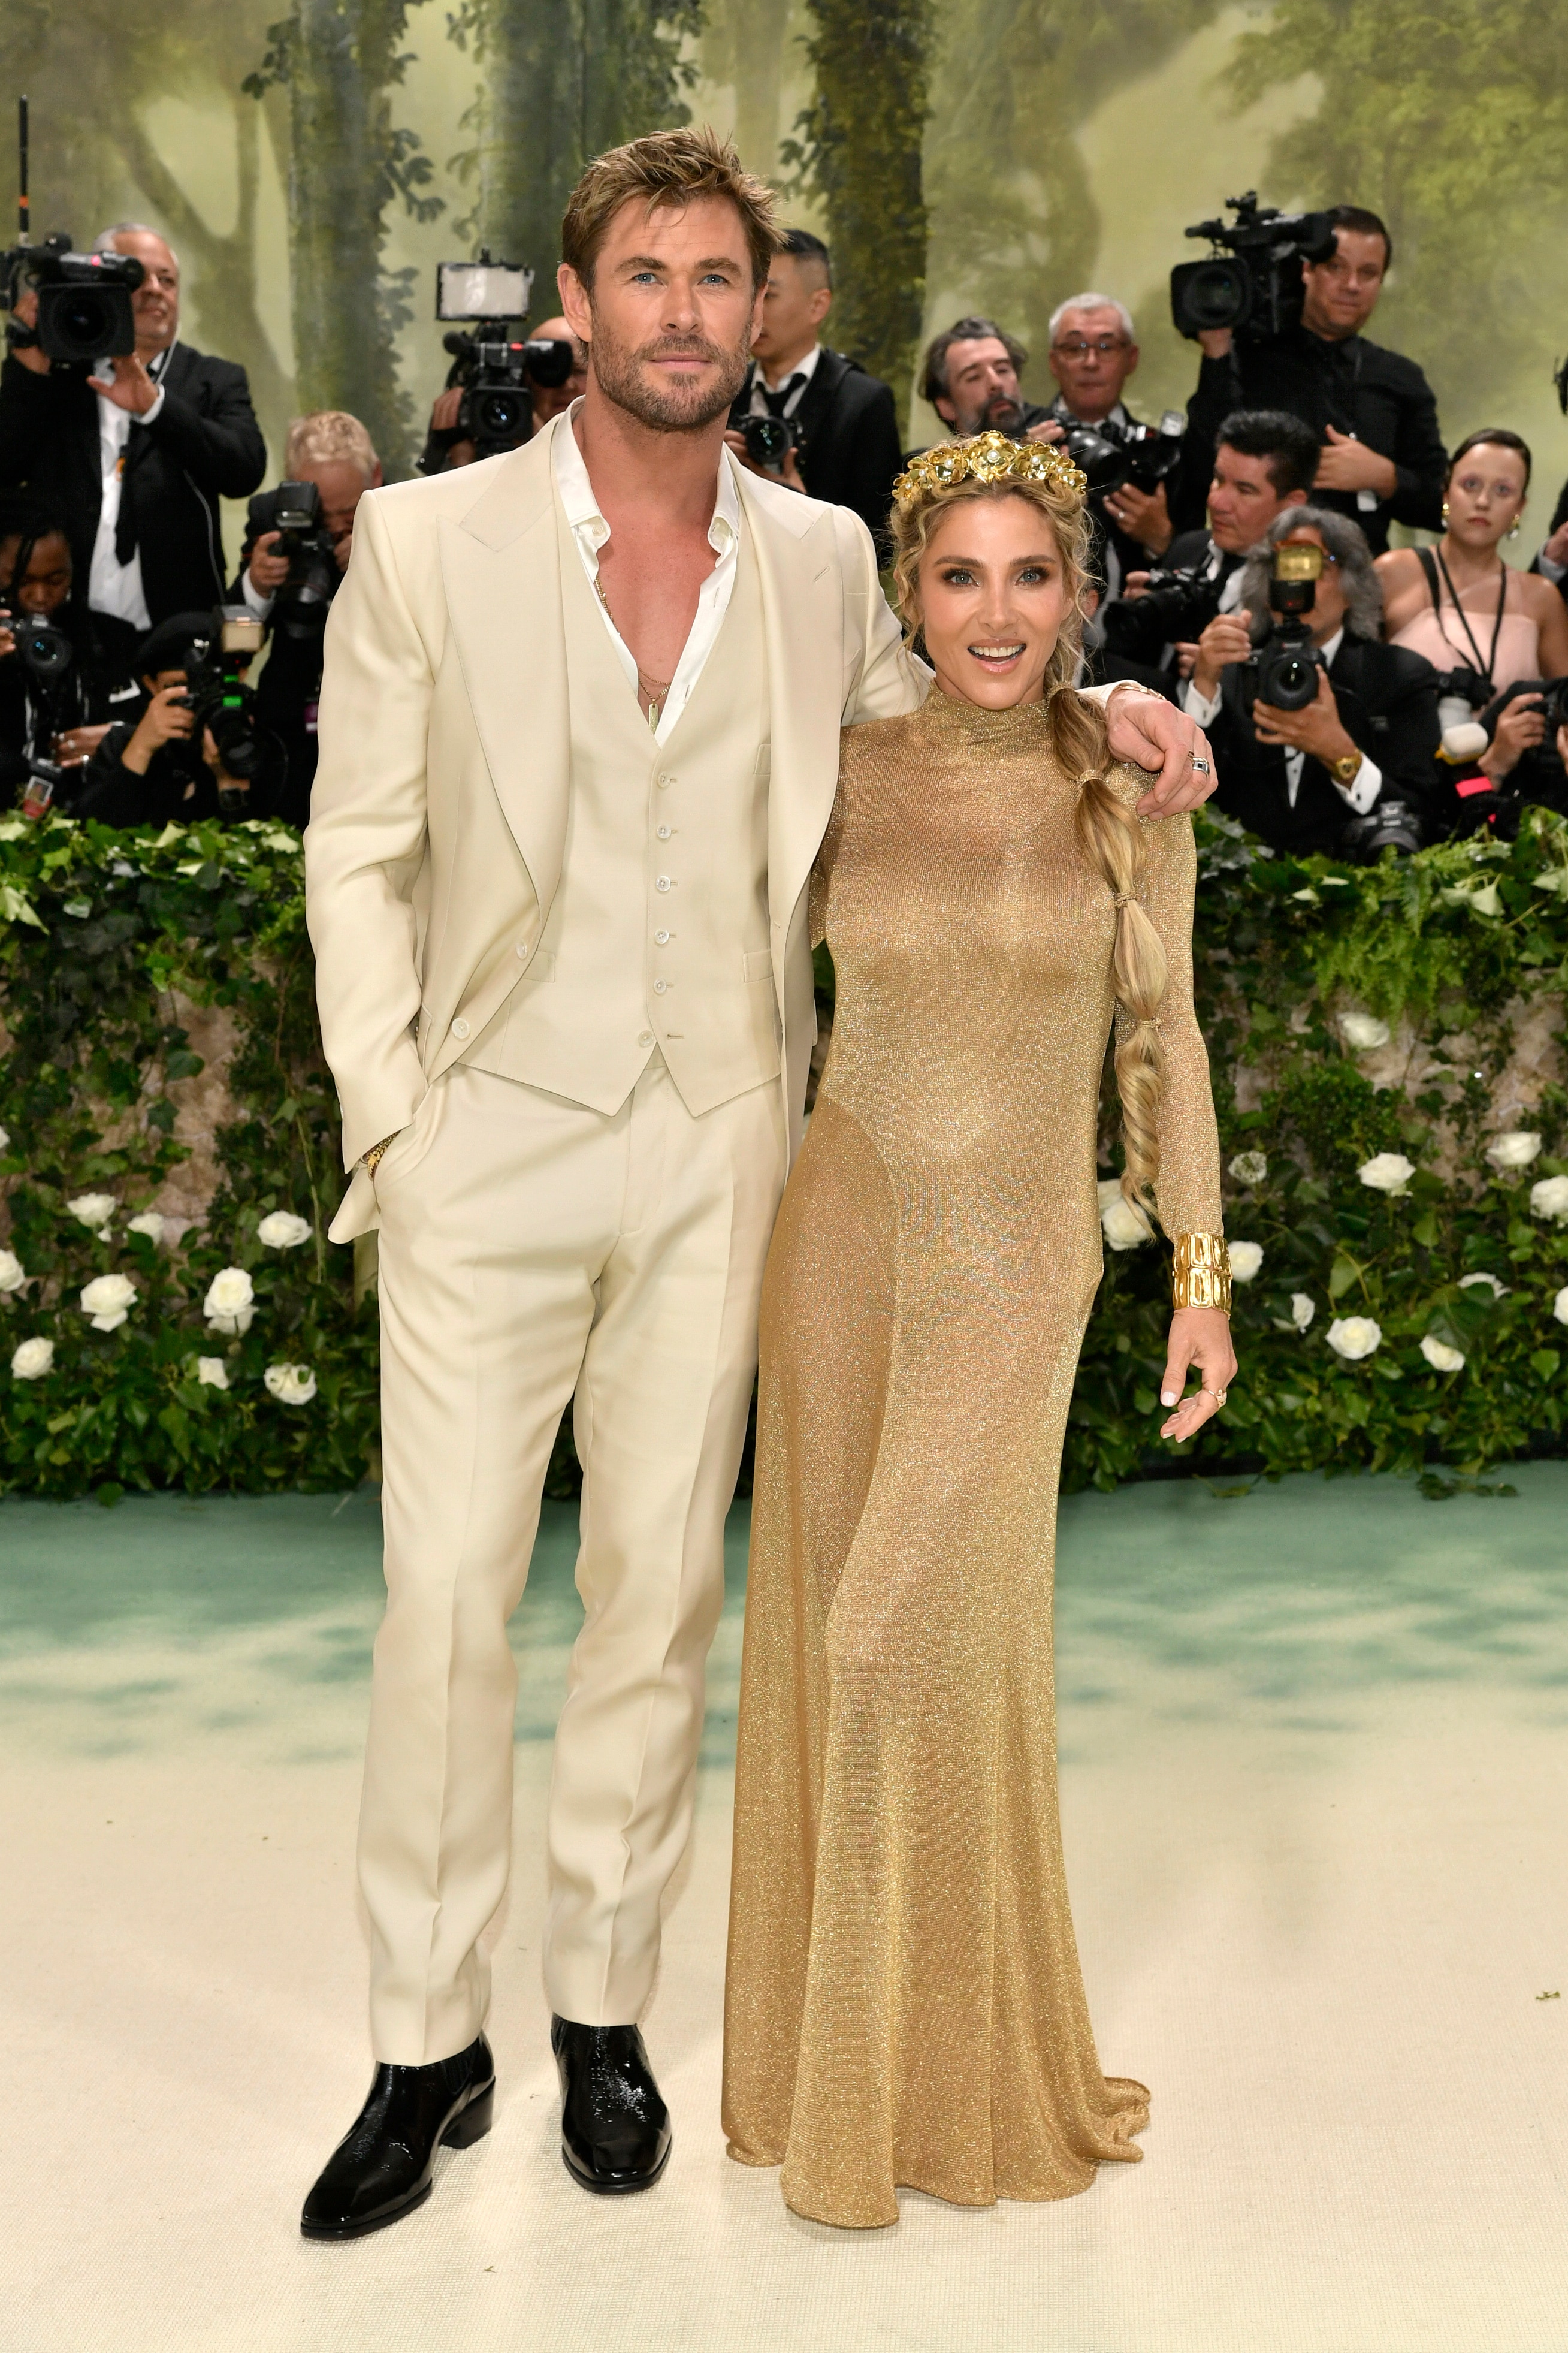 Chris Hemsworth wearing a silky champagne suit and Elsa Pataky in a long sleeve gold sparkly gown 